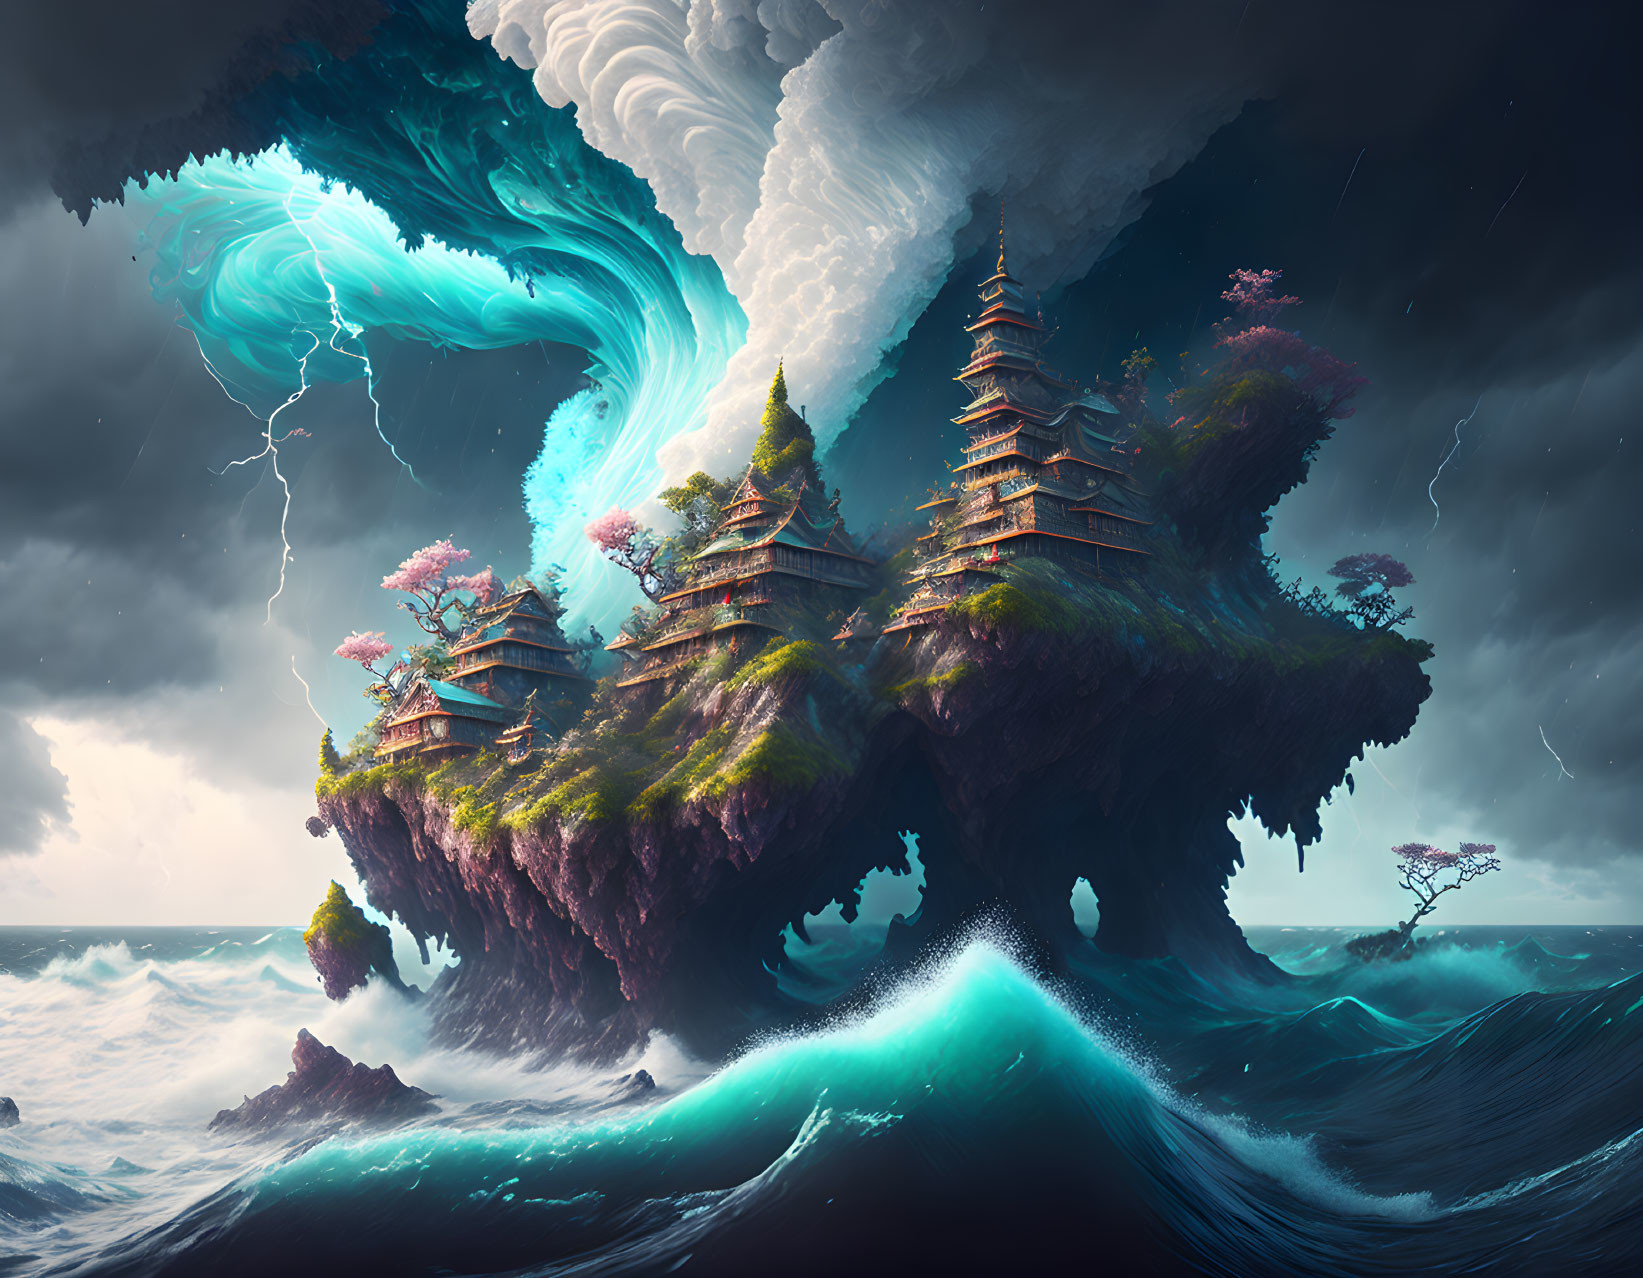 Floating islands with pagodas in stormy sea with swirling clouds and lightning.